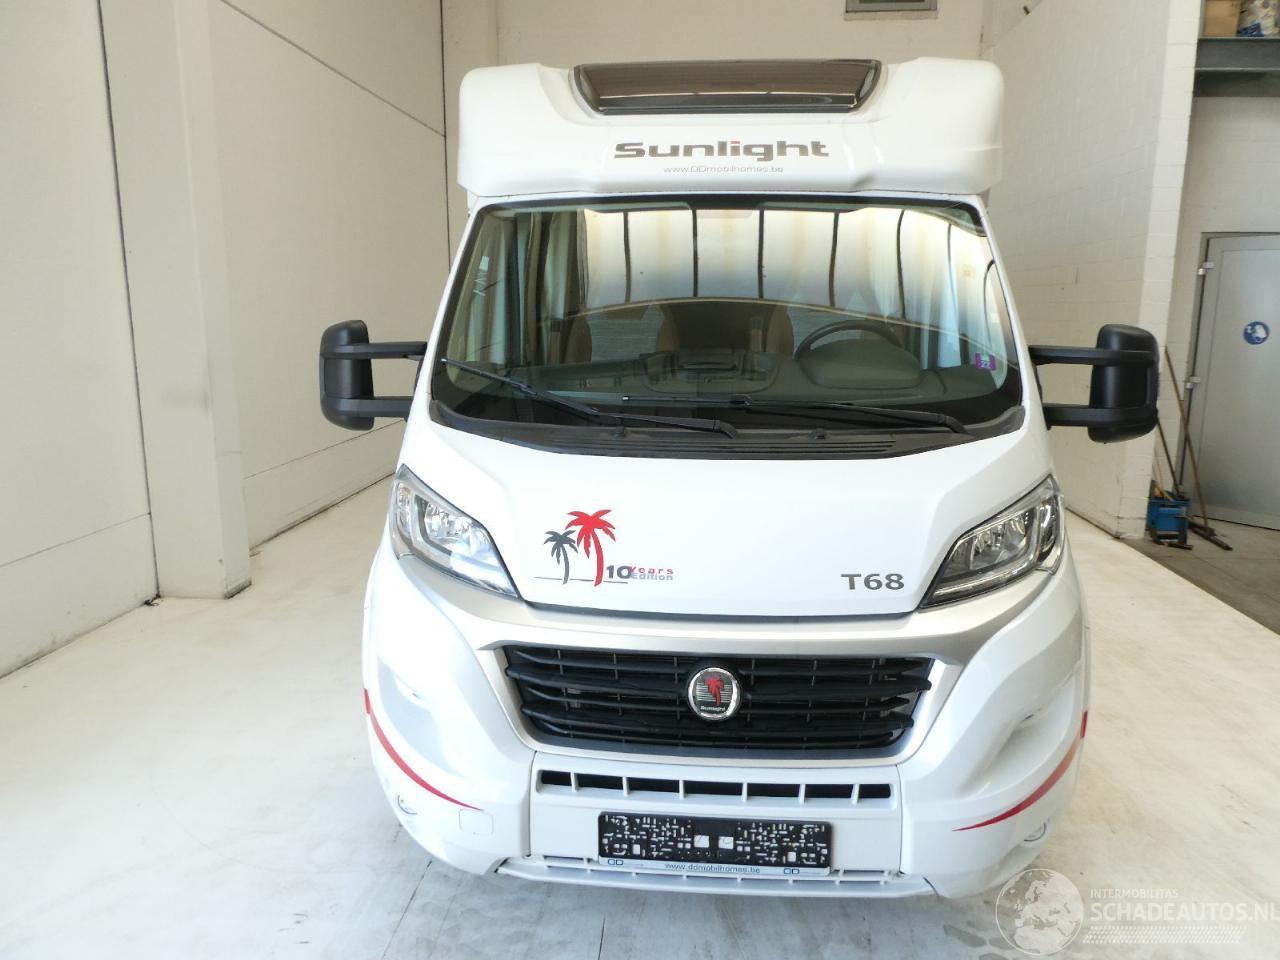 Fiat Ducato Roller 10 YEARS EDITION 2.3 D SUNLIGHT T68